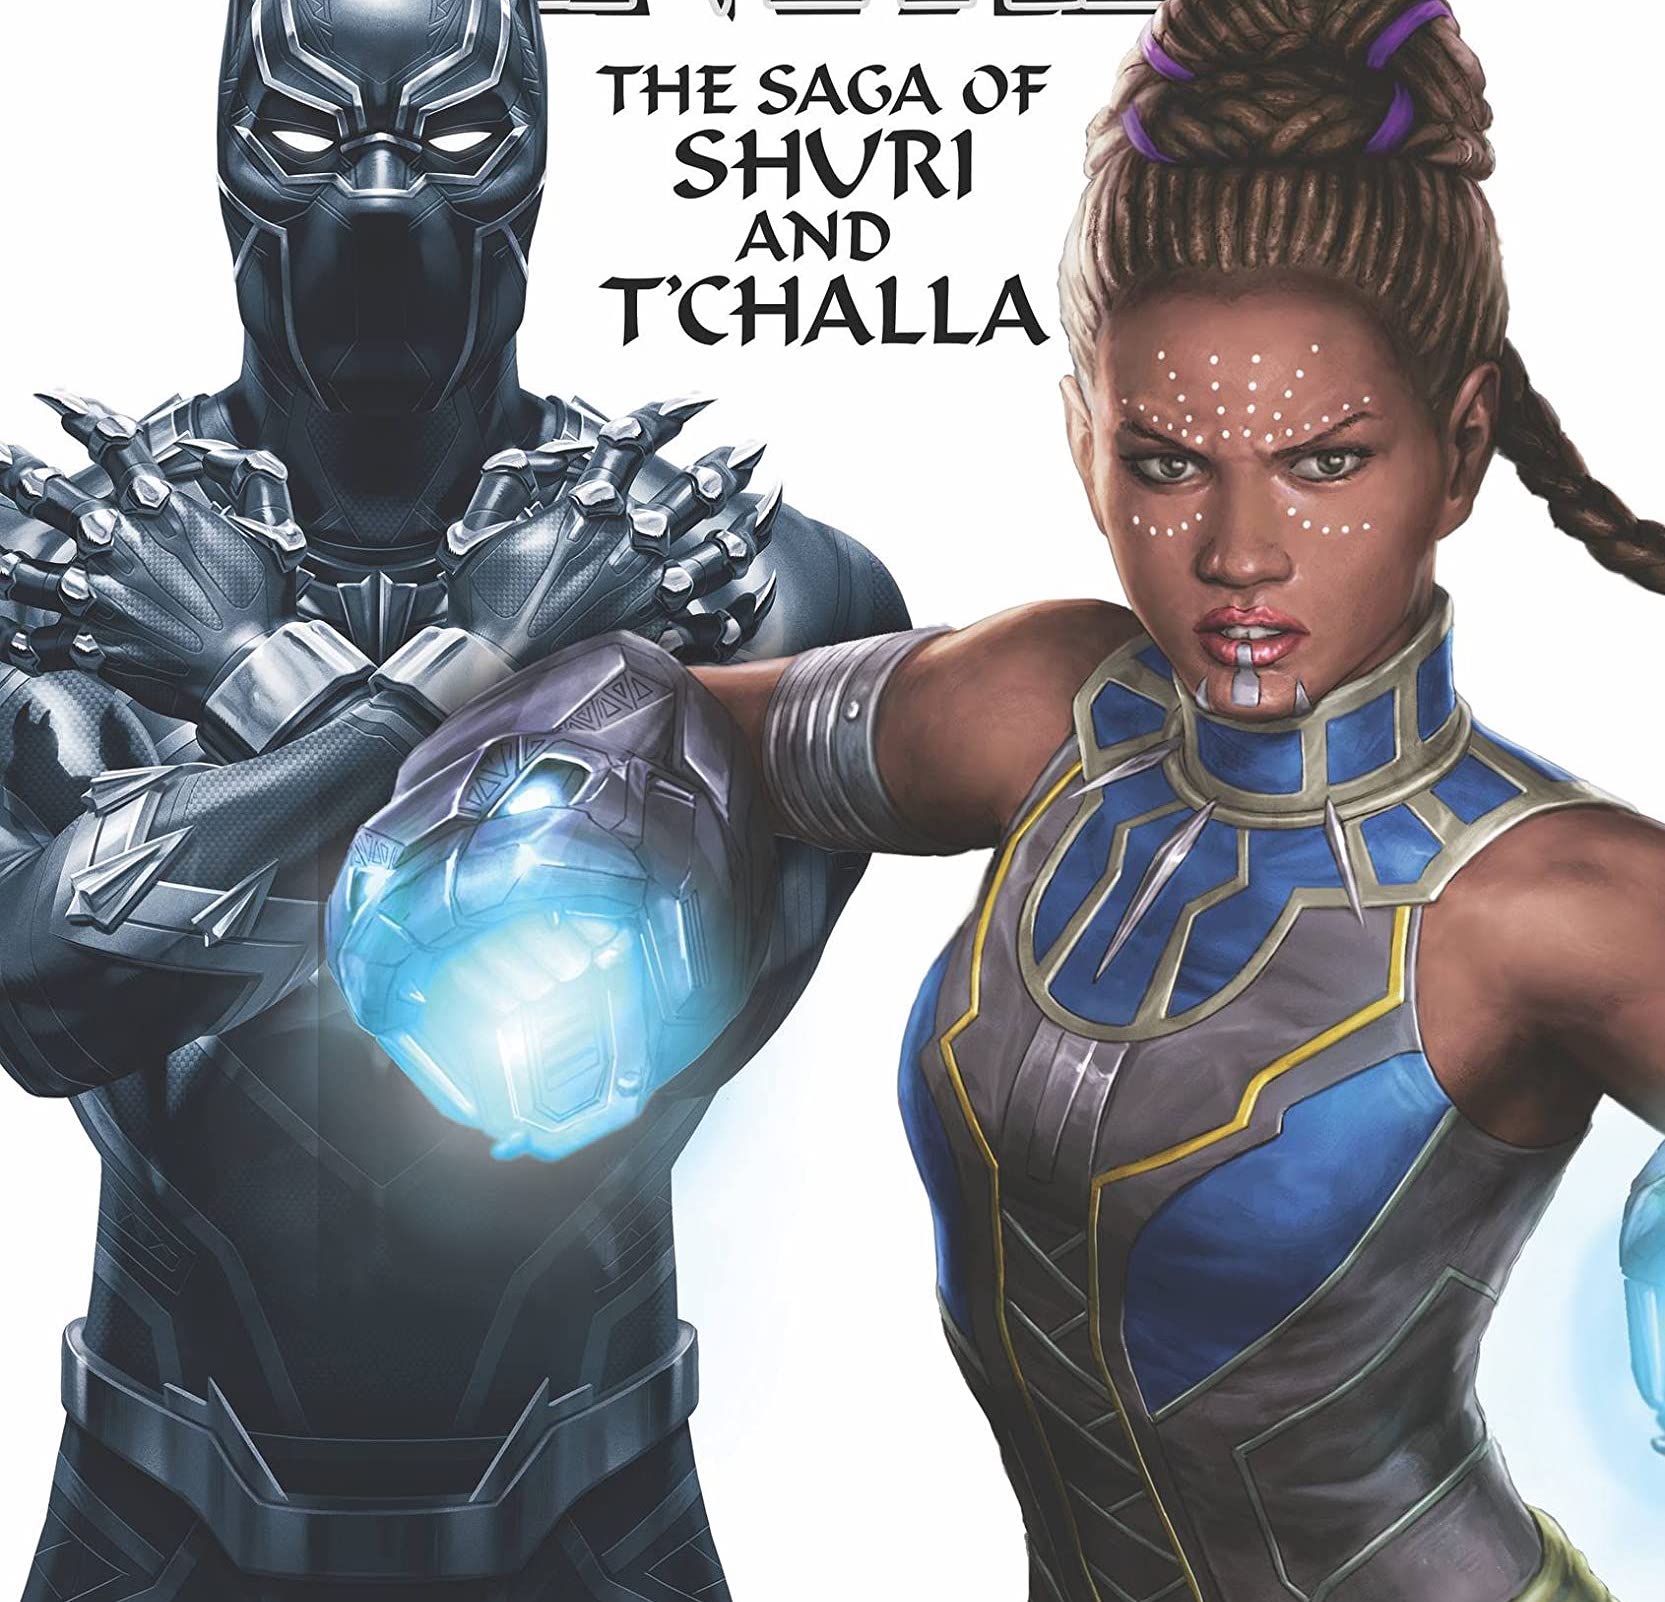 'The Black Panther: The Saga of Shuri & T’Challa' features a wide swath of Shuri tales